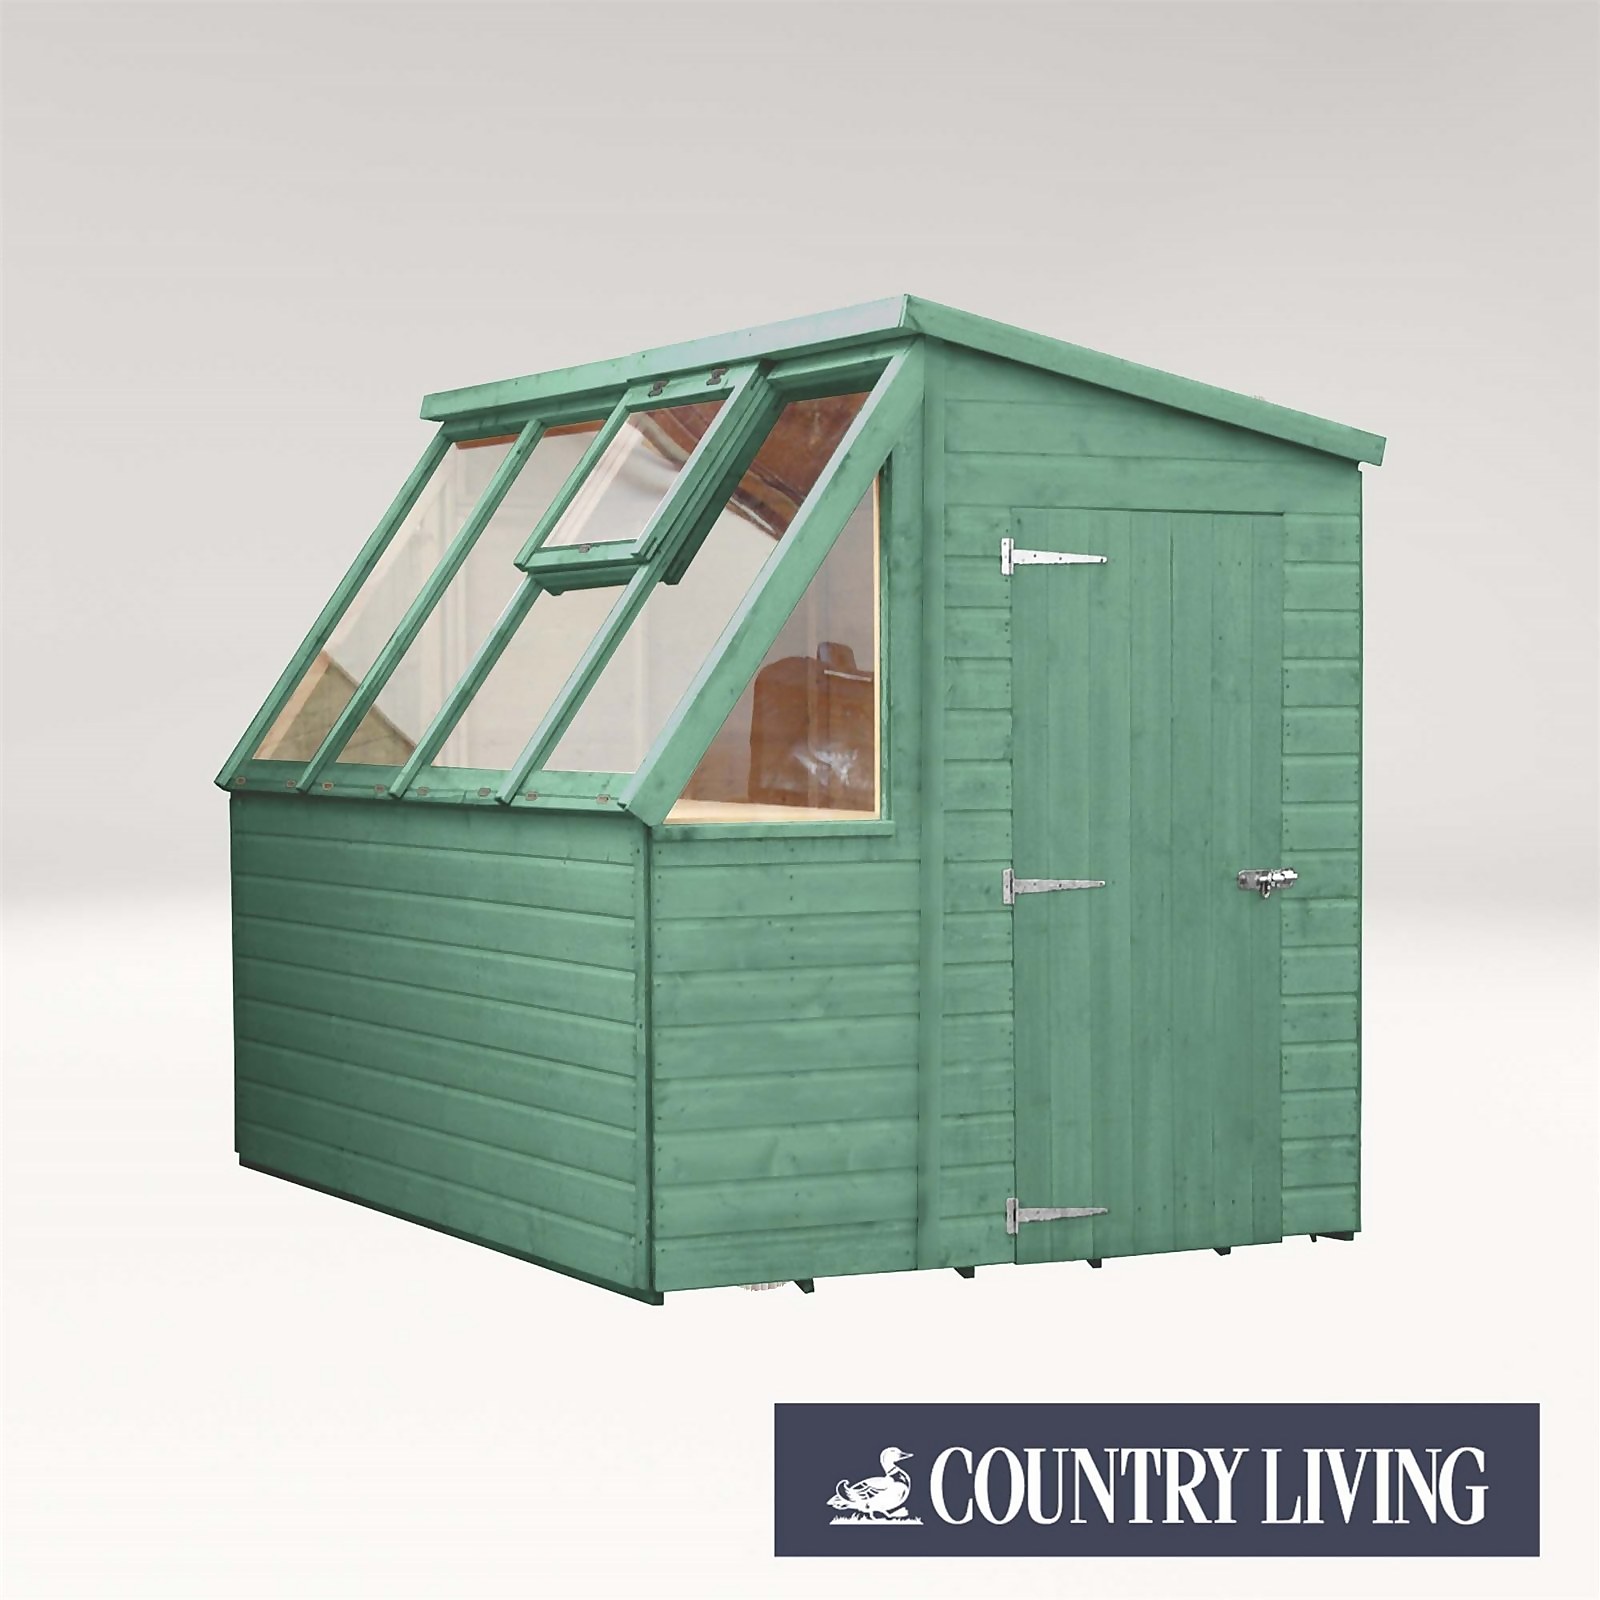 Country Living Caythorpe 8 x 6 Premium Potting Shed Painted + Installation - Aurora Green